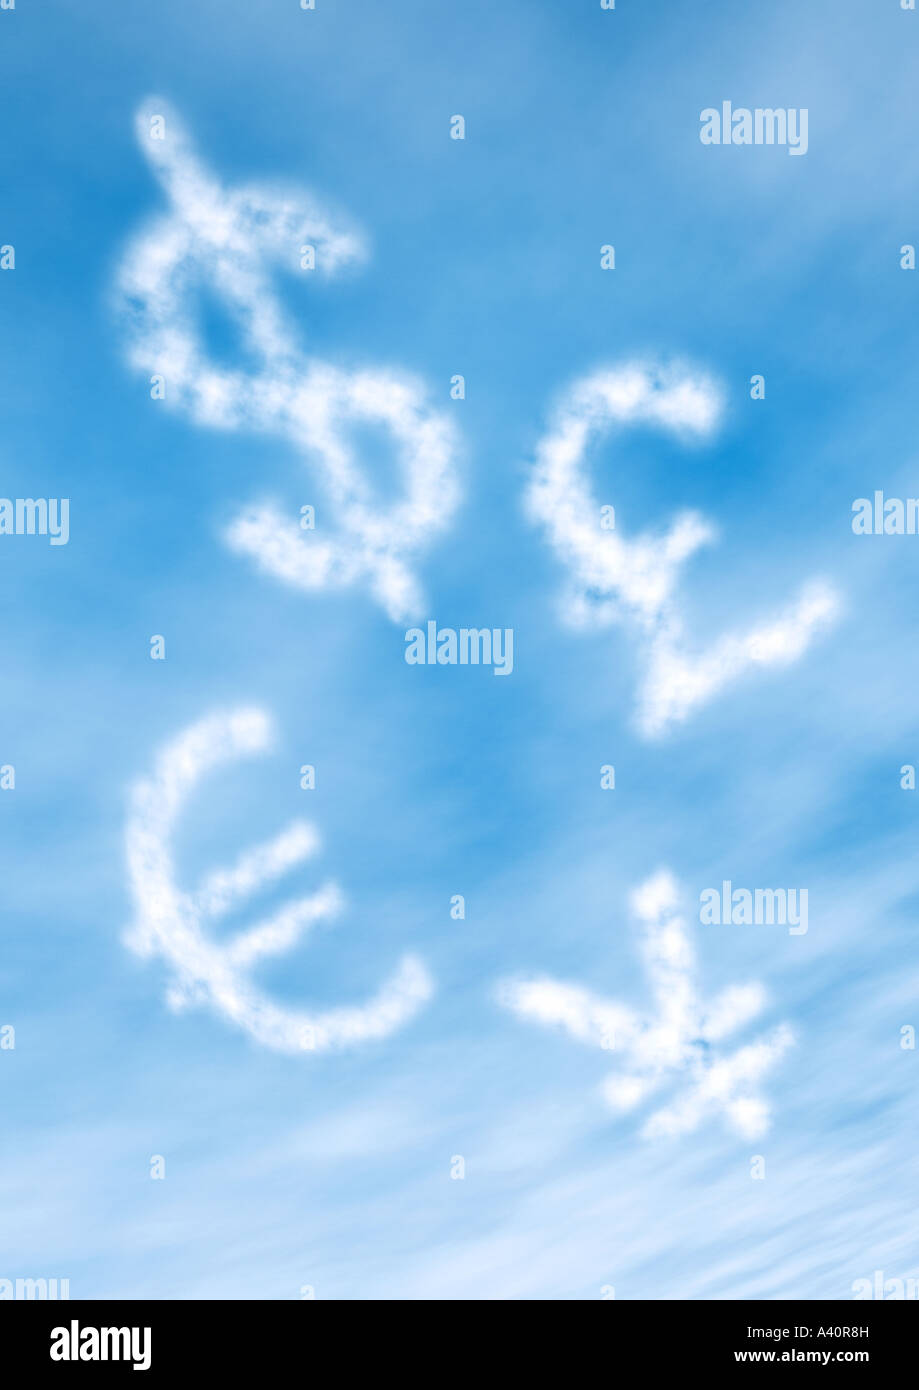 Euro Dollar Yen Pound in the clouds Stock Photo